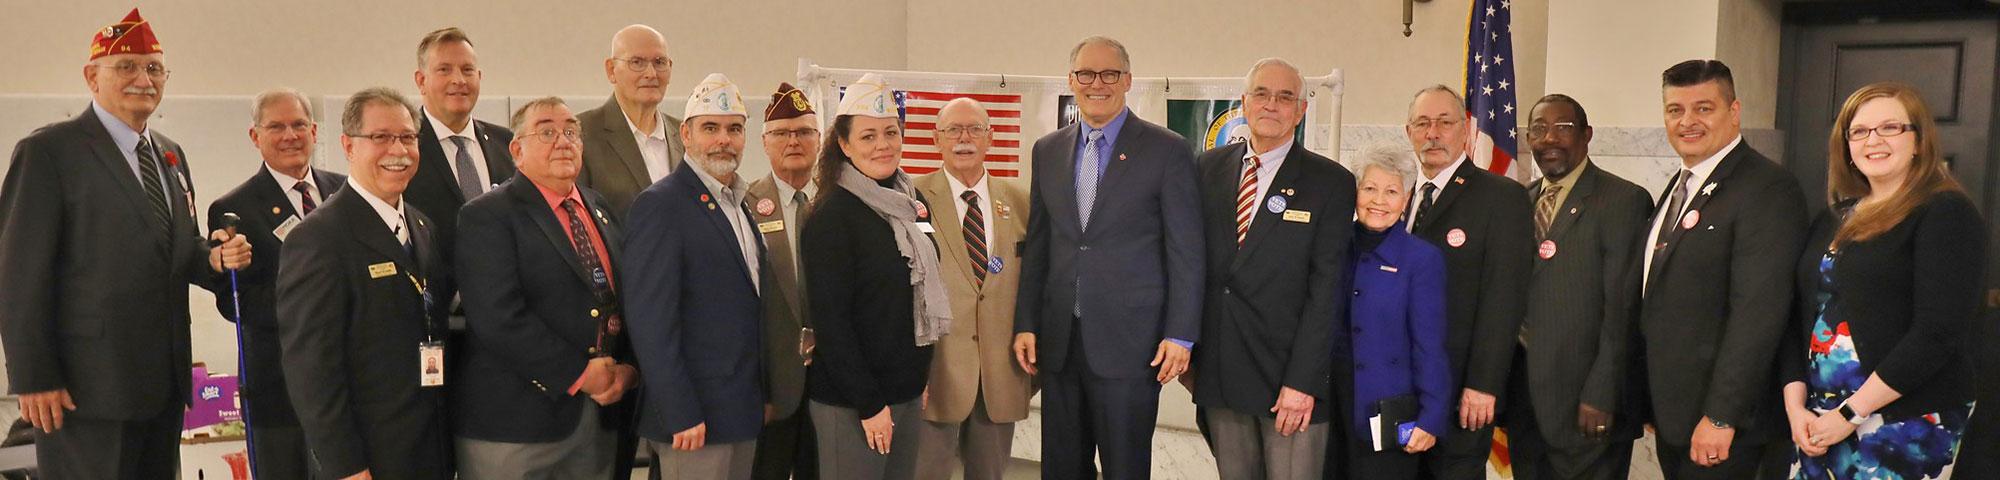 2020.01.17 Veterans Legislative Coalition (VLC) Reception at the Capitol - Special Words from Governor Inslee